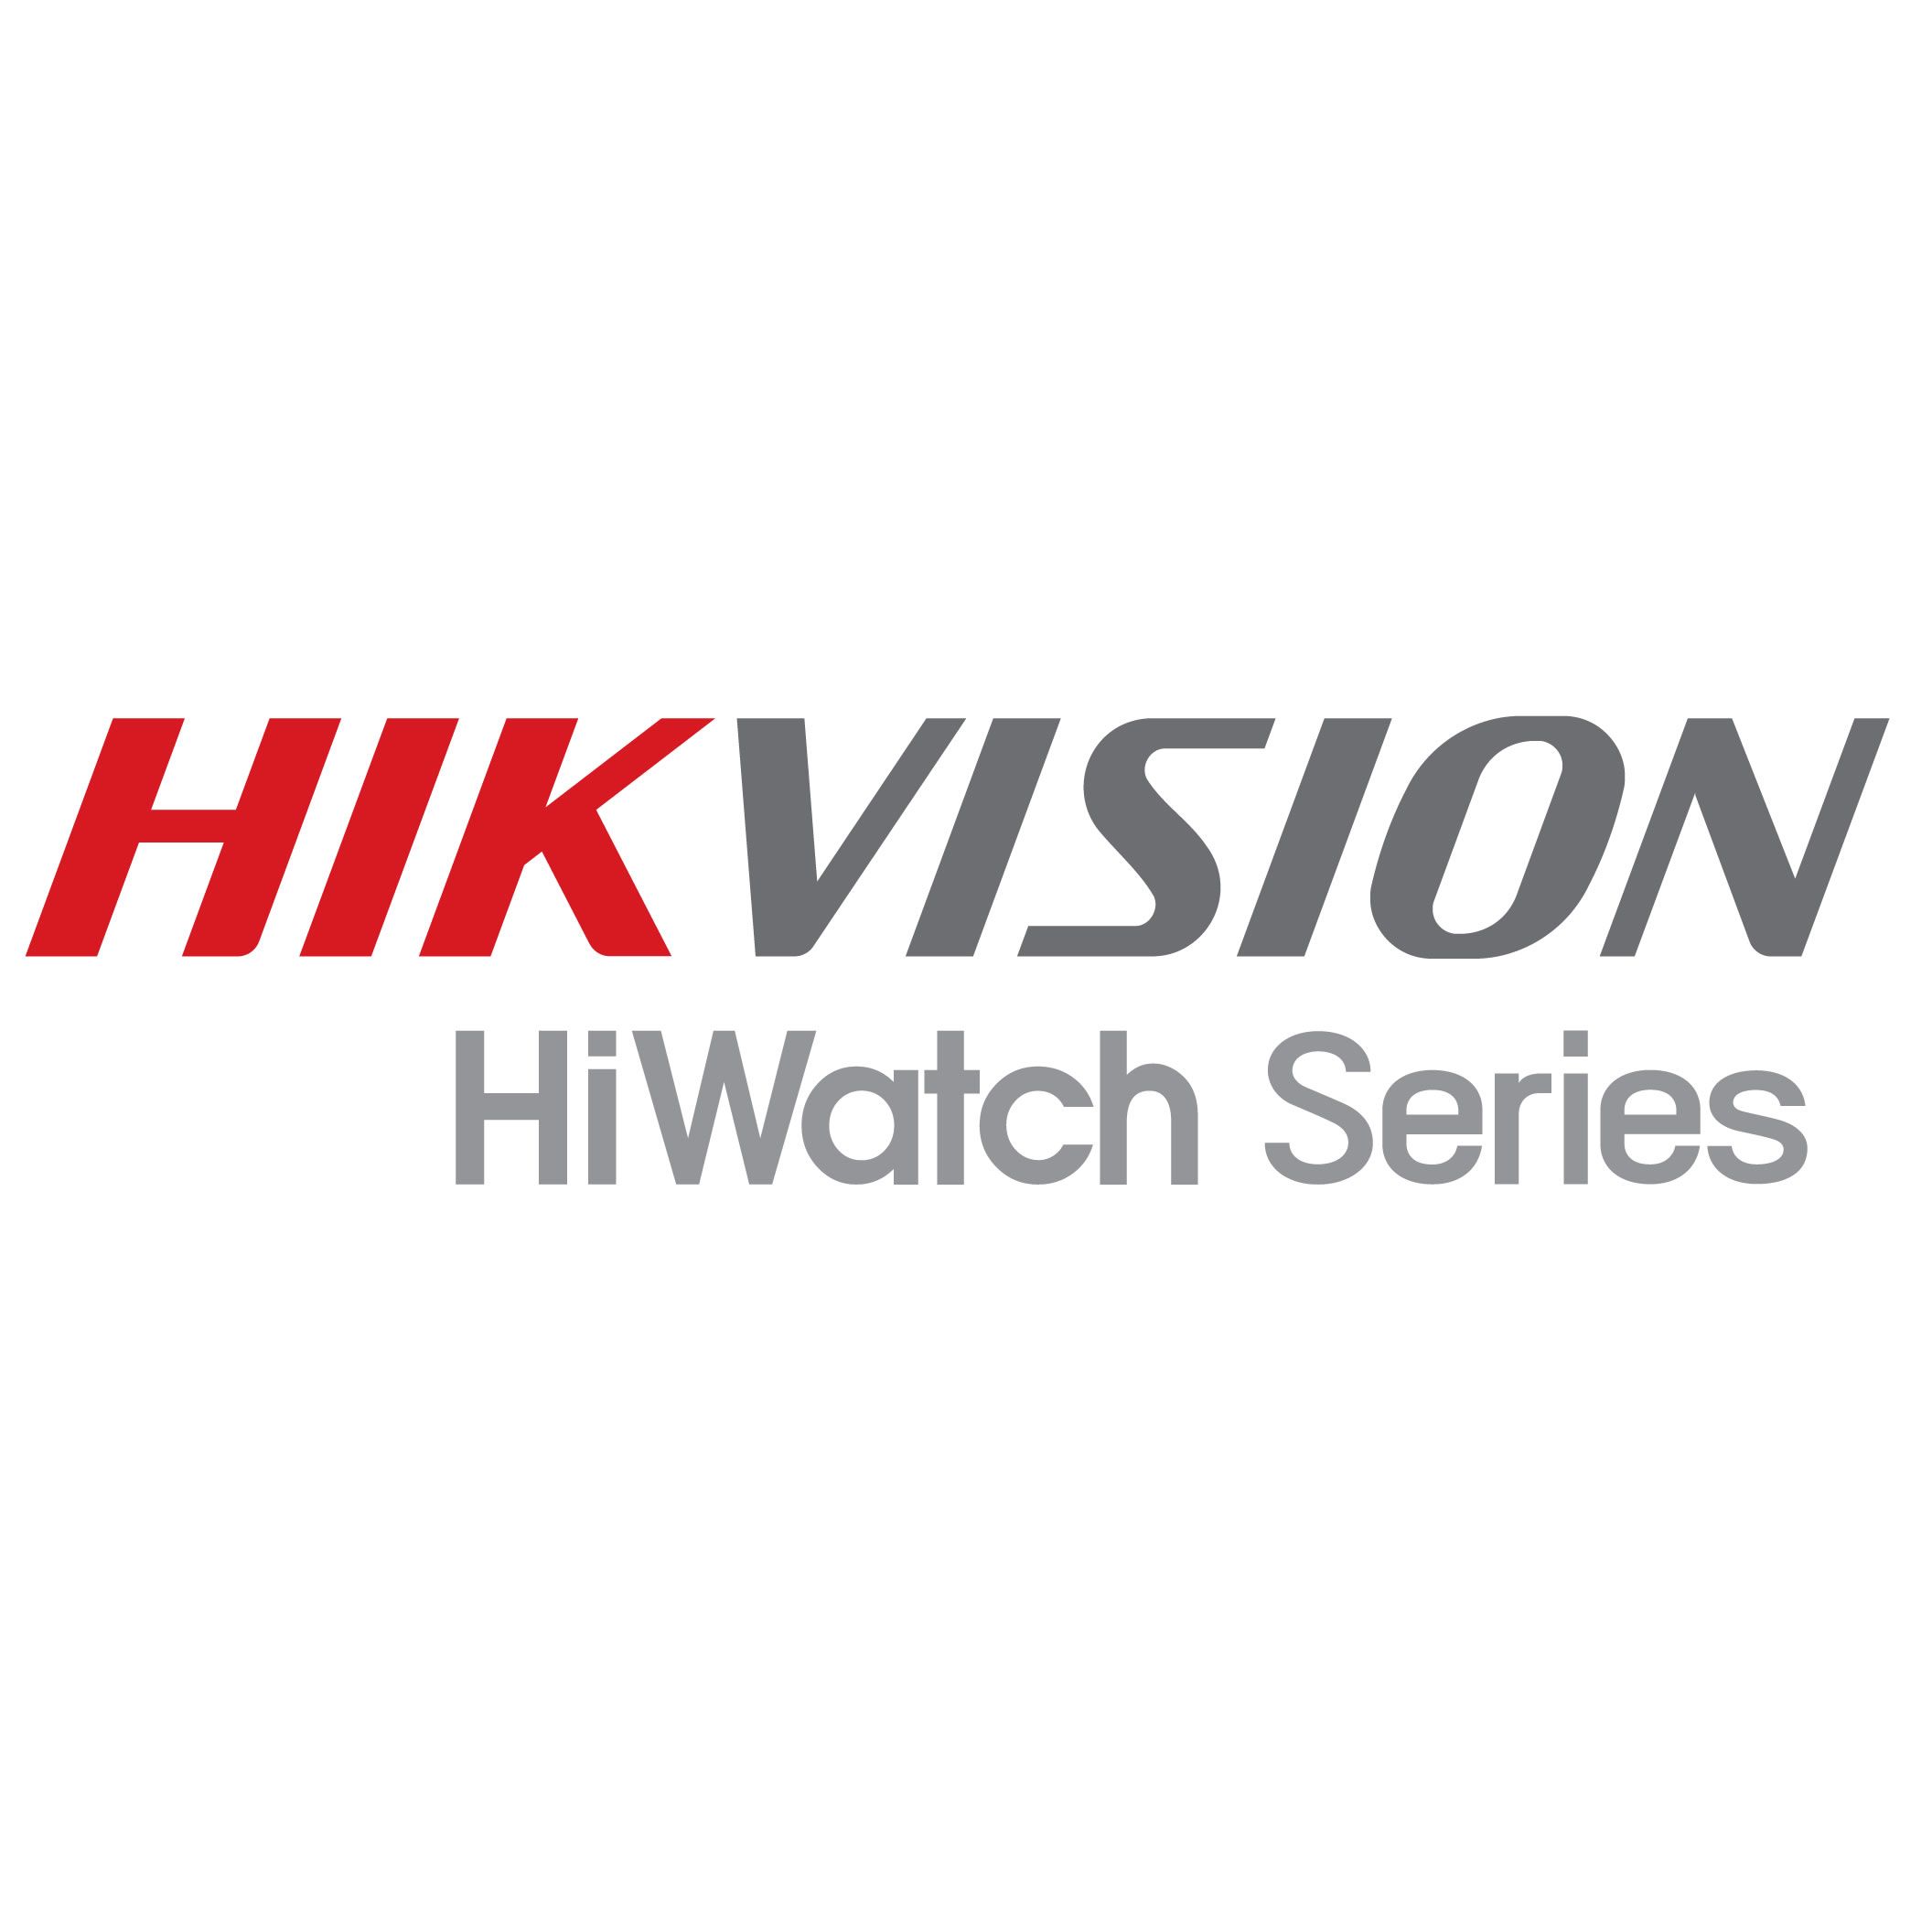 HIKVISION Hiwatch